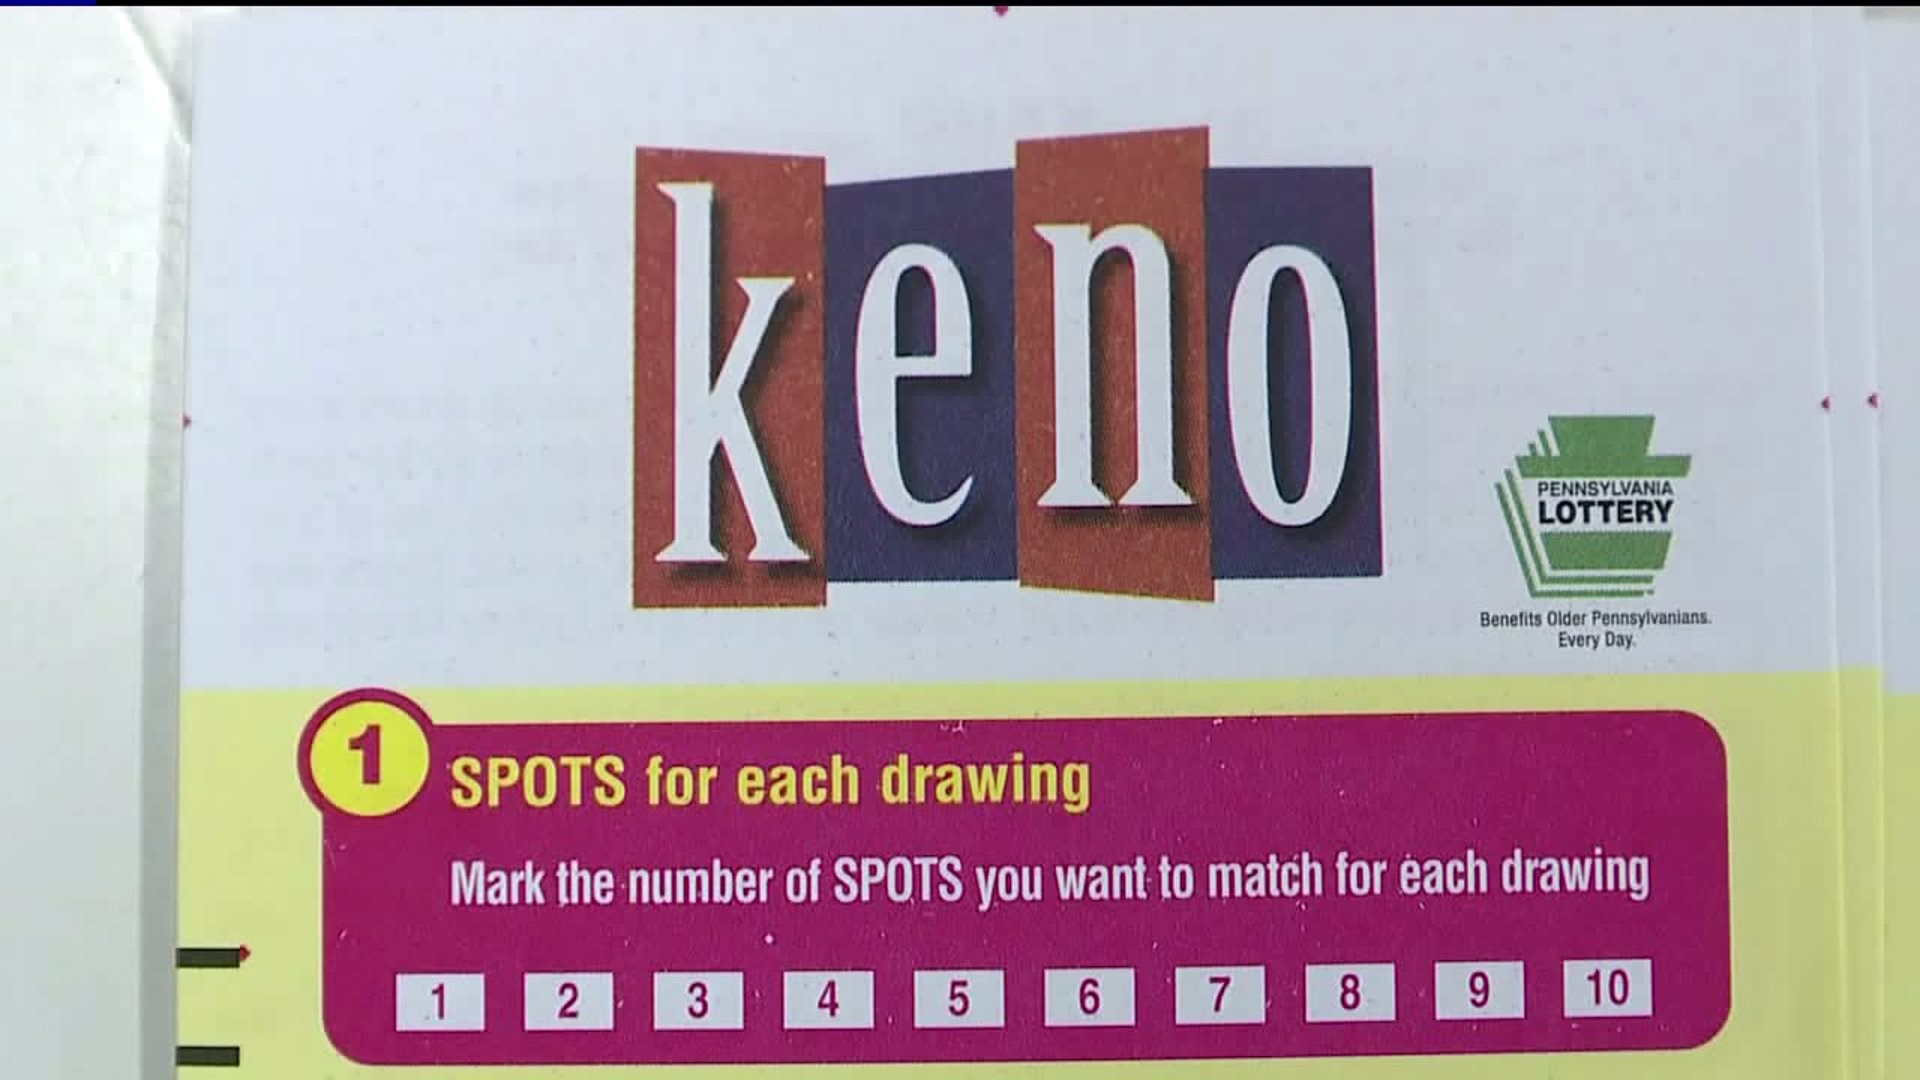 Lottery Players Keen for Keno